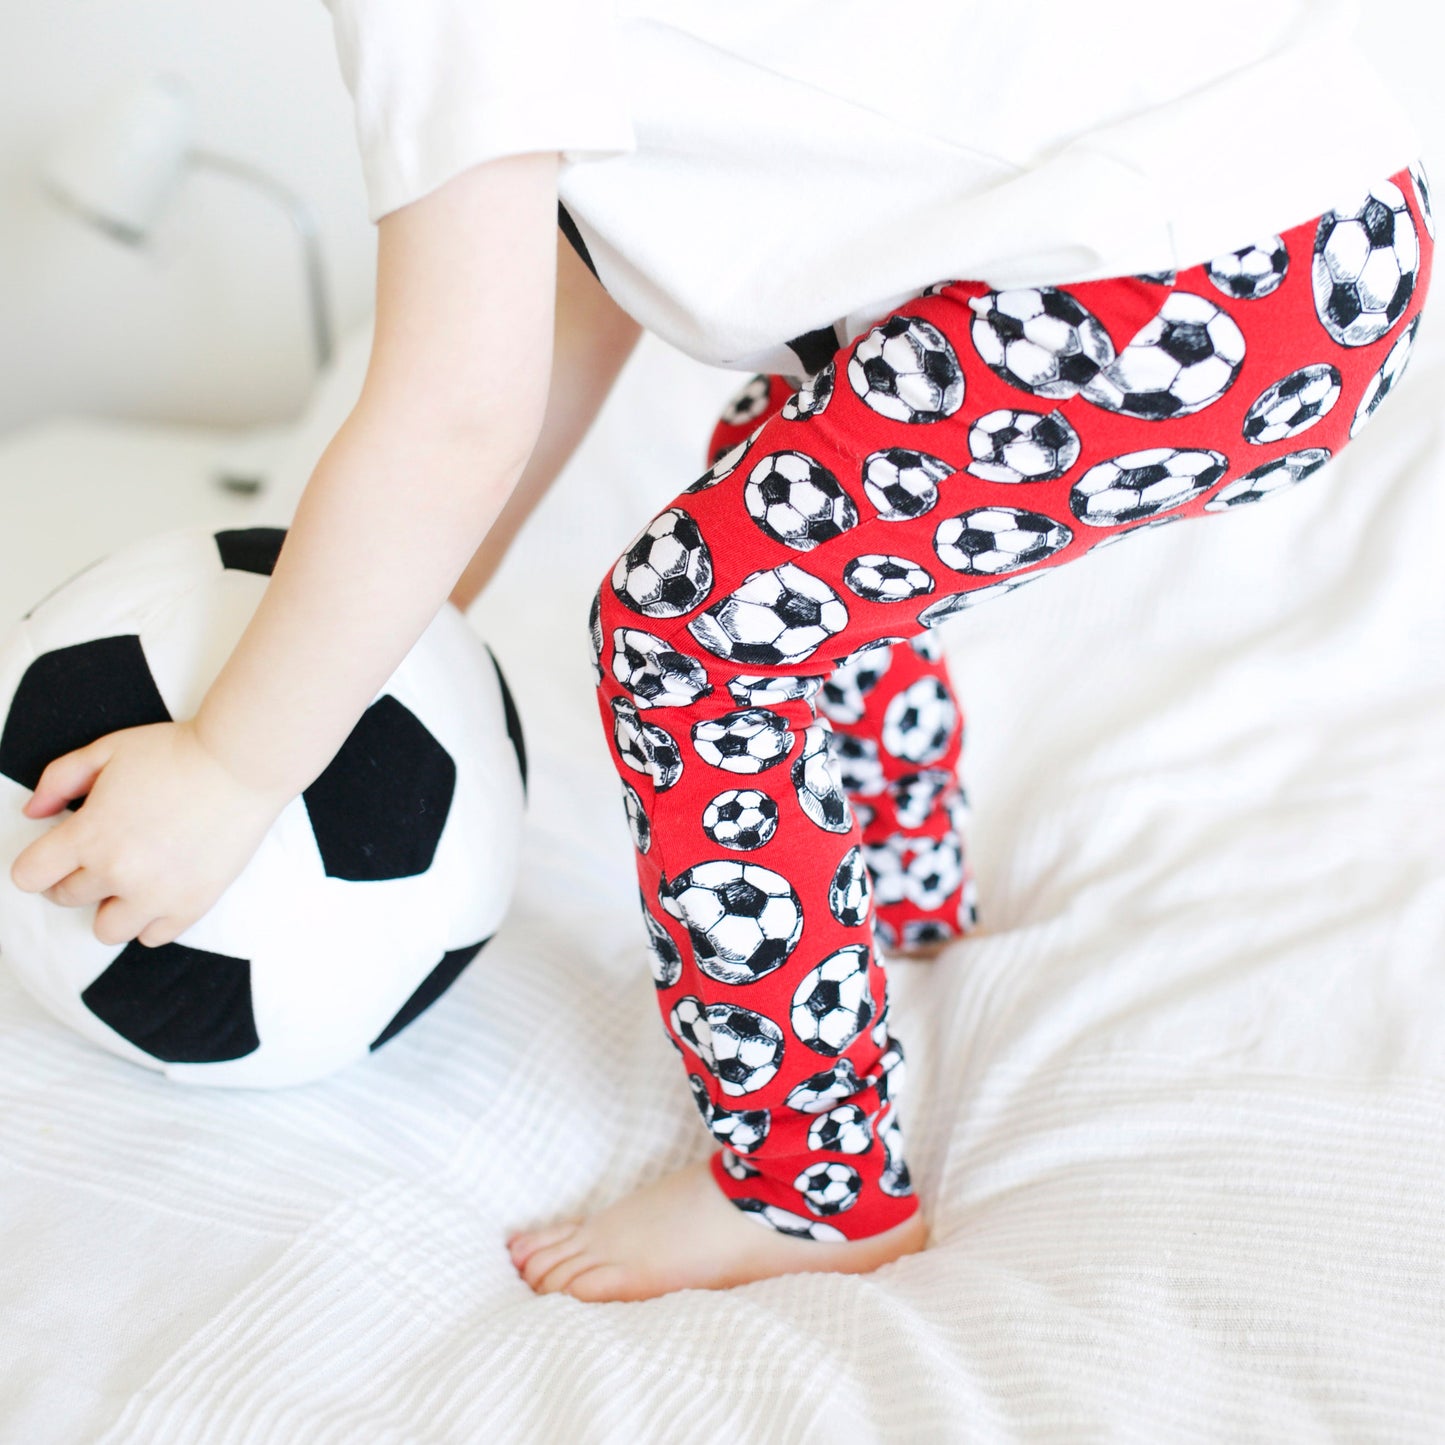 Load image into Gallery viewer, Red Team Football Leggings
